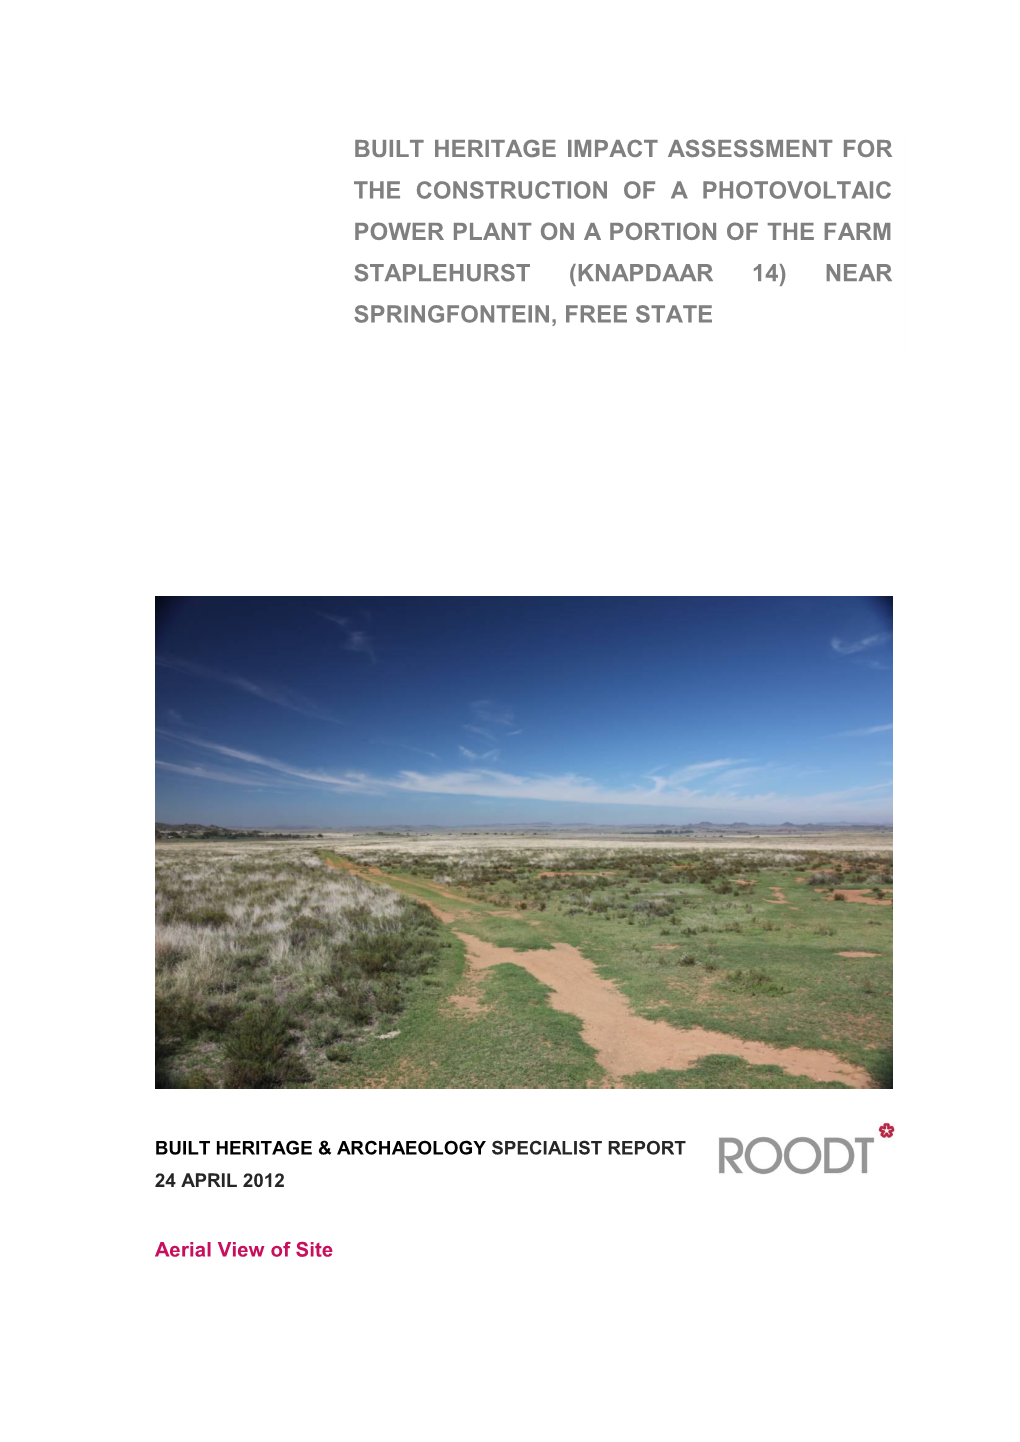 Built Heritage Impact Assessment for the Construction of a Photovoltaic Power Plant on a Portion of the Farm Staplehurst (Knapdaar 14) Near Springfontein, Free State